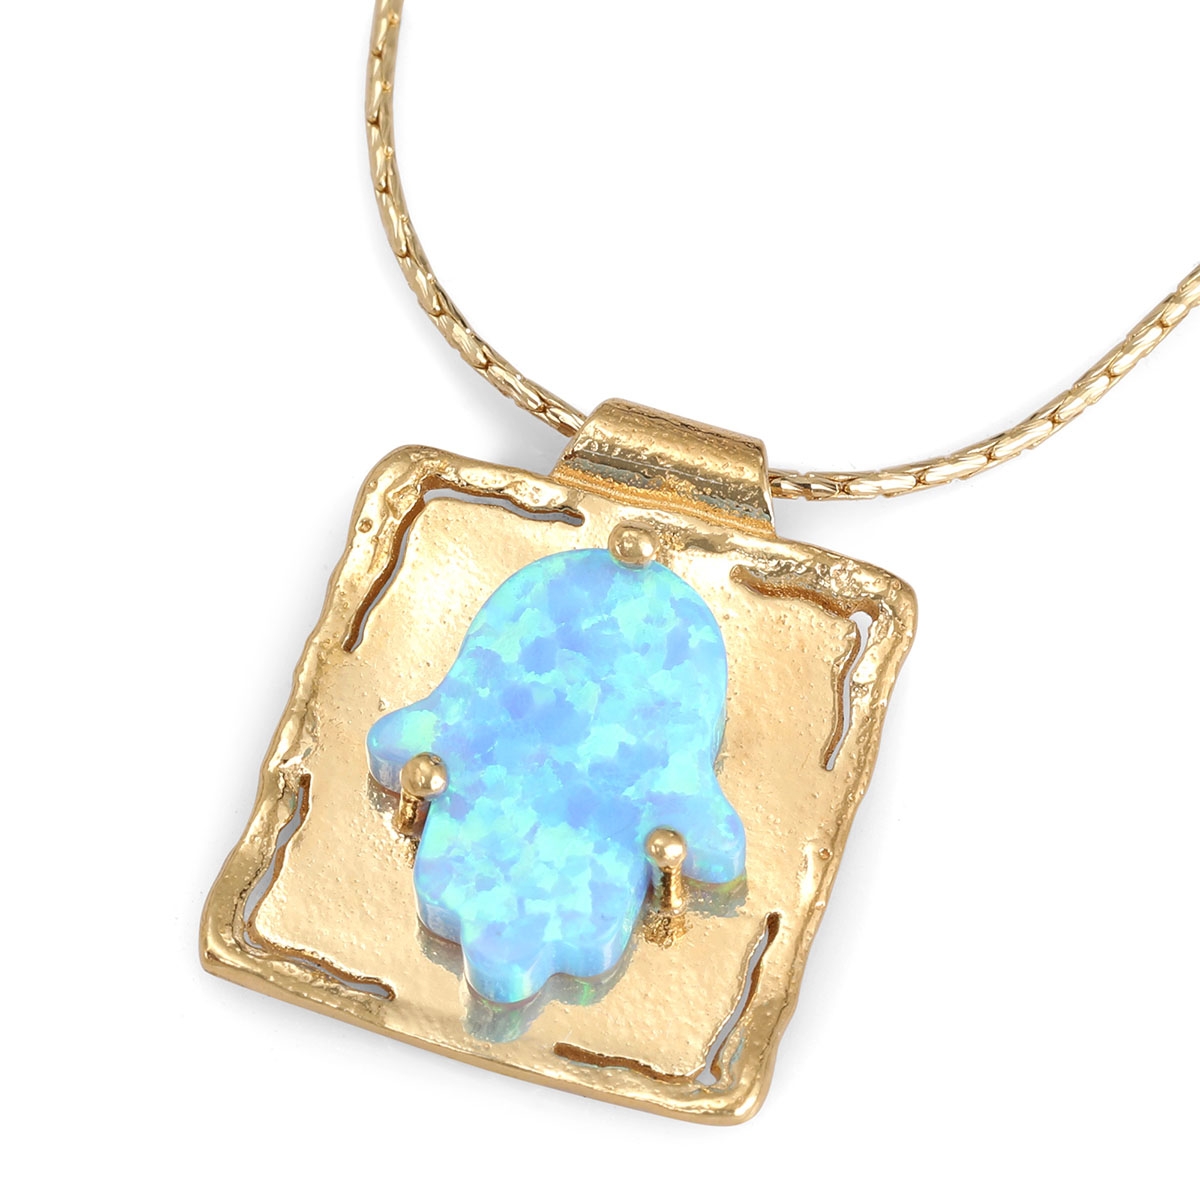 Chic Gold-Plated Necklace With Opal Hamsa Design - 1